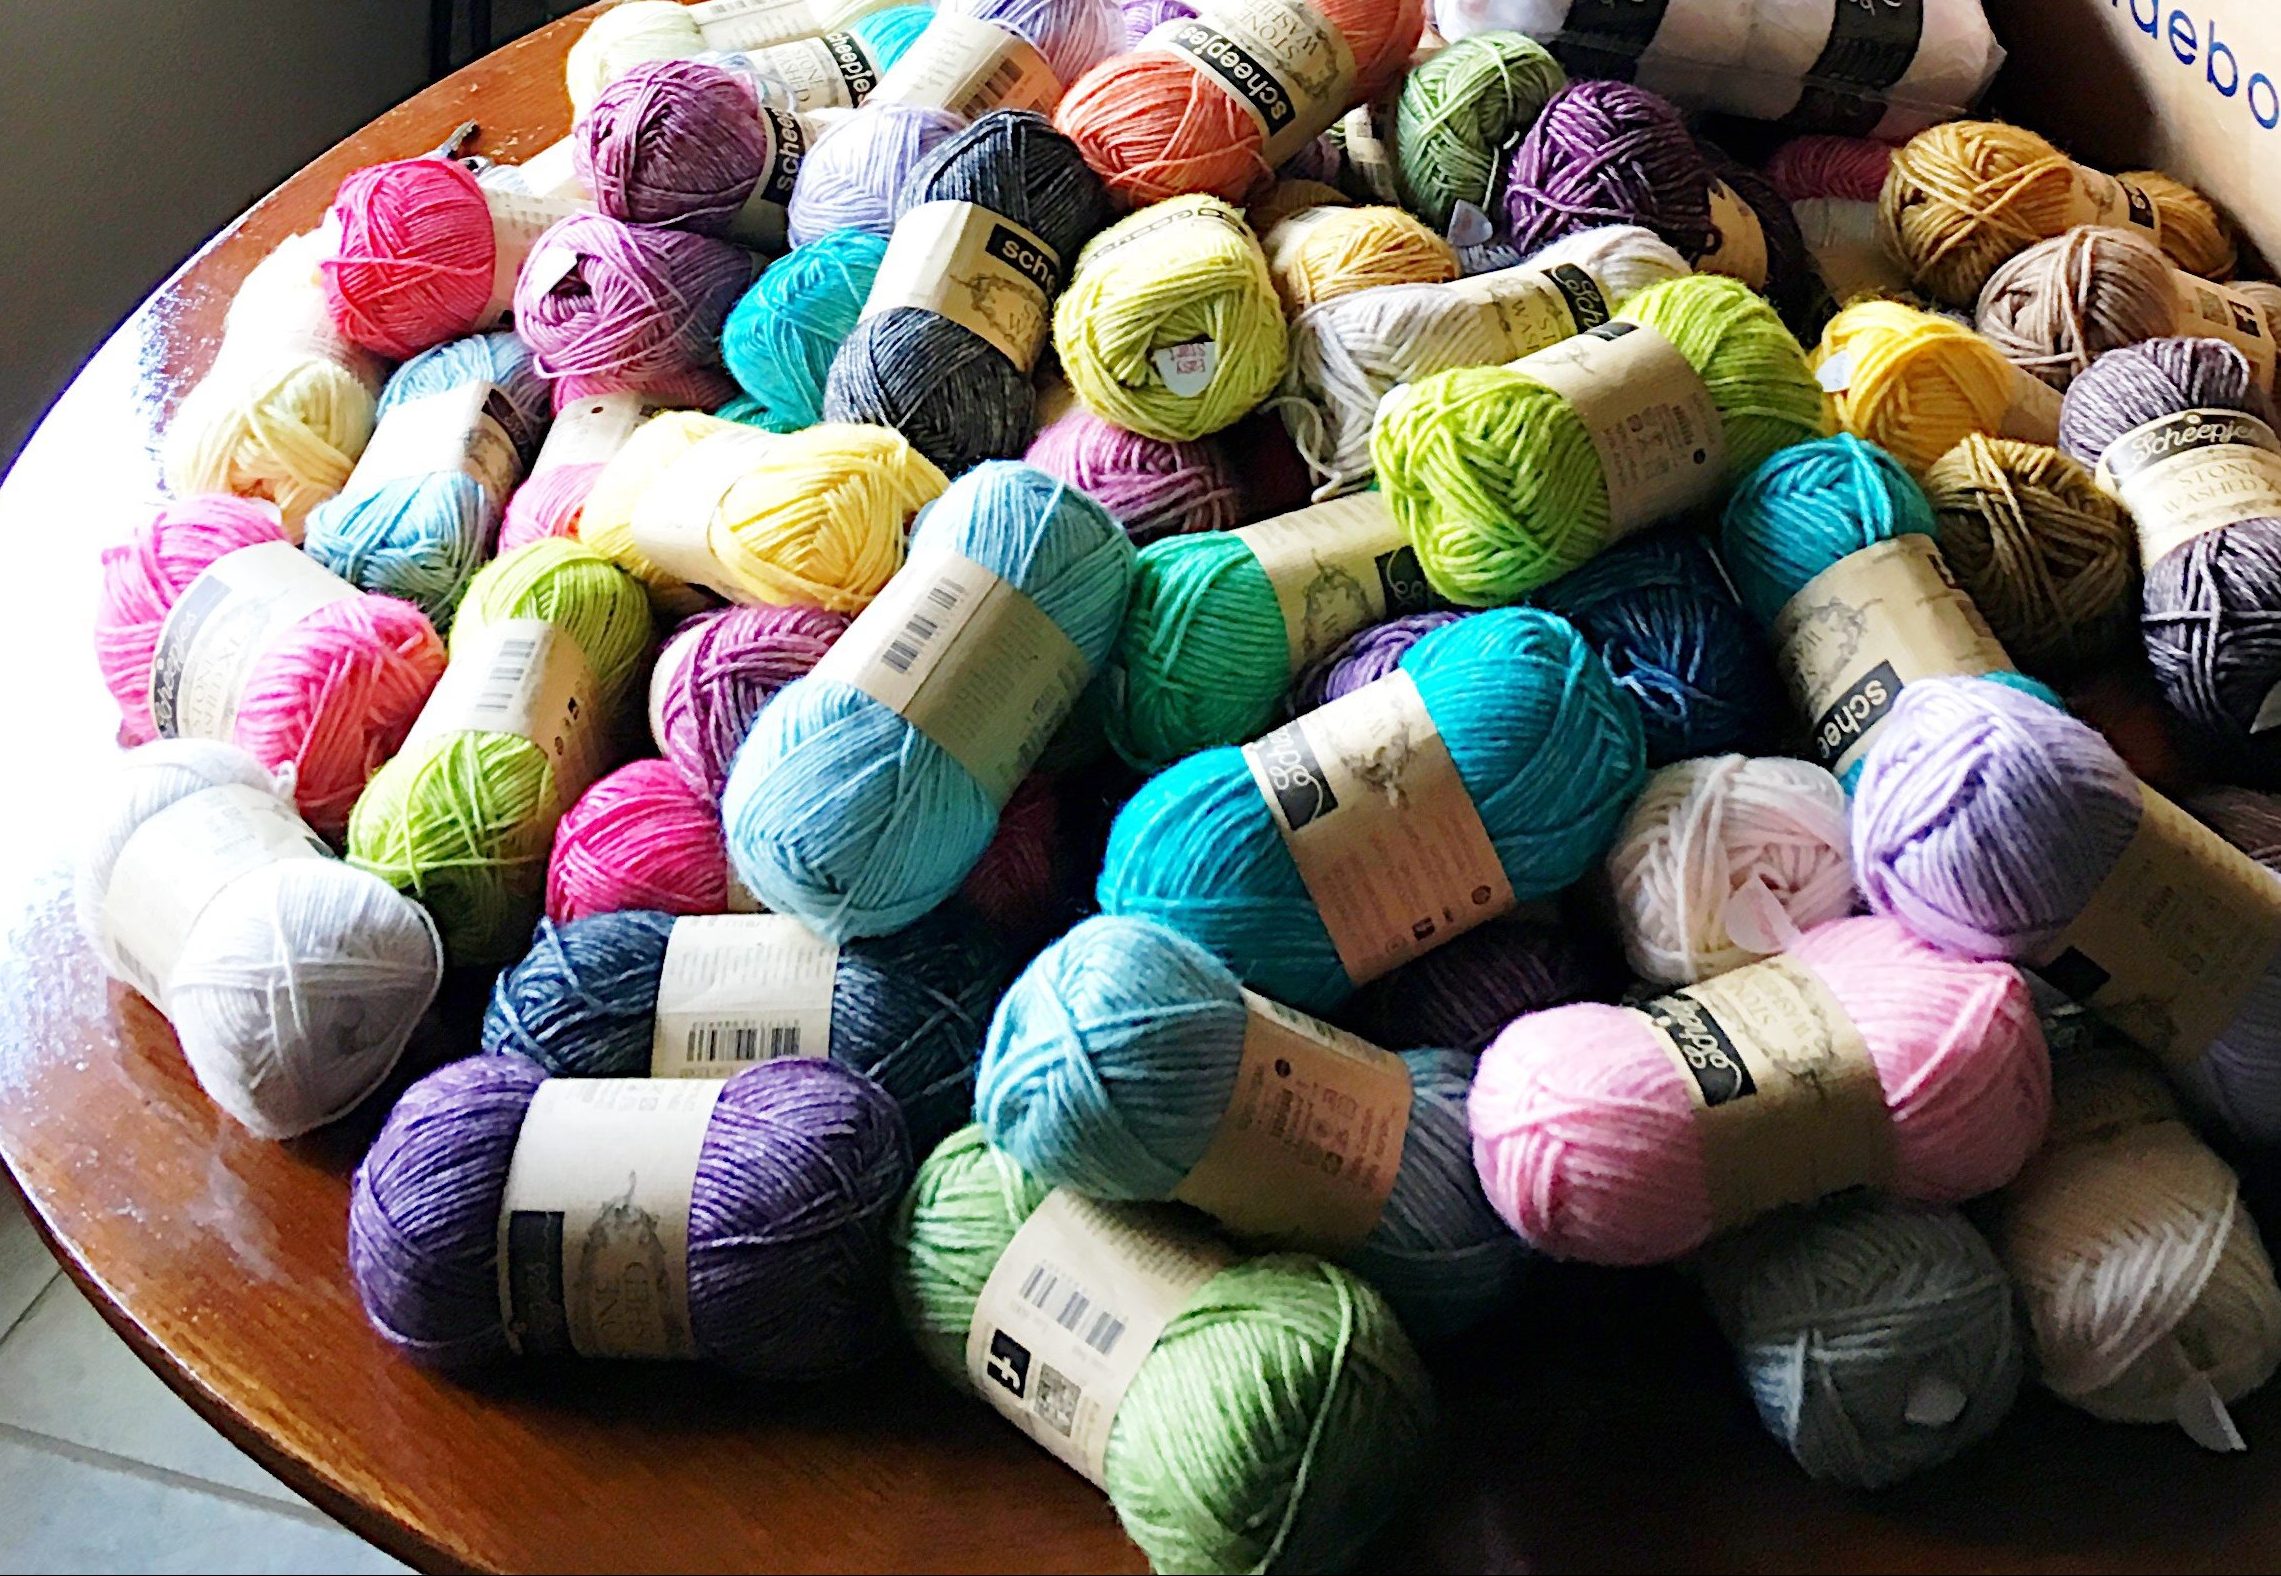 10 Gr Yarn Scheepjes Stone Washed / River Washed Cotton / Acrylic Lovely  Soft Knitting Crochet Yarn for Knitting Crochet Small Projects 